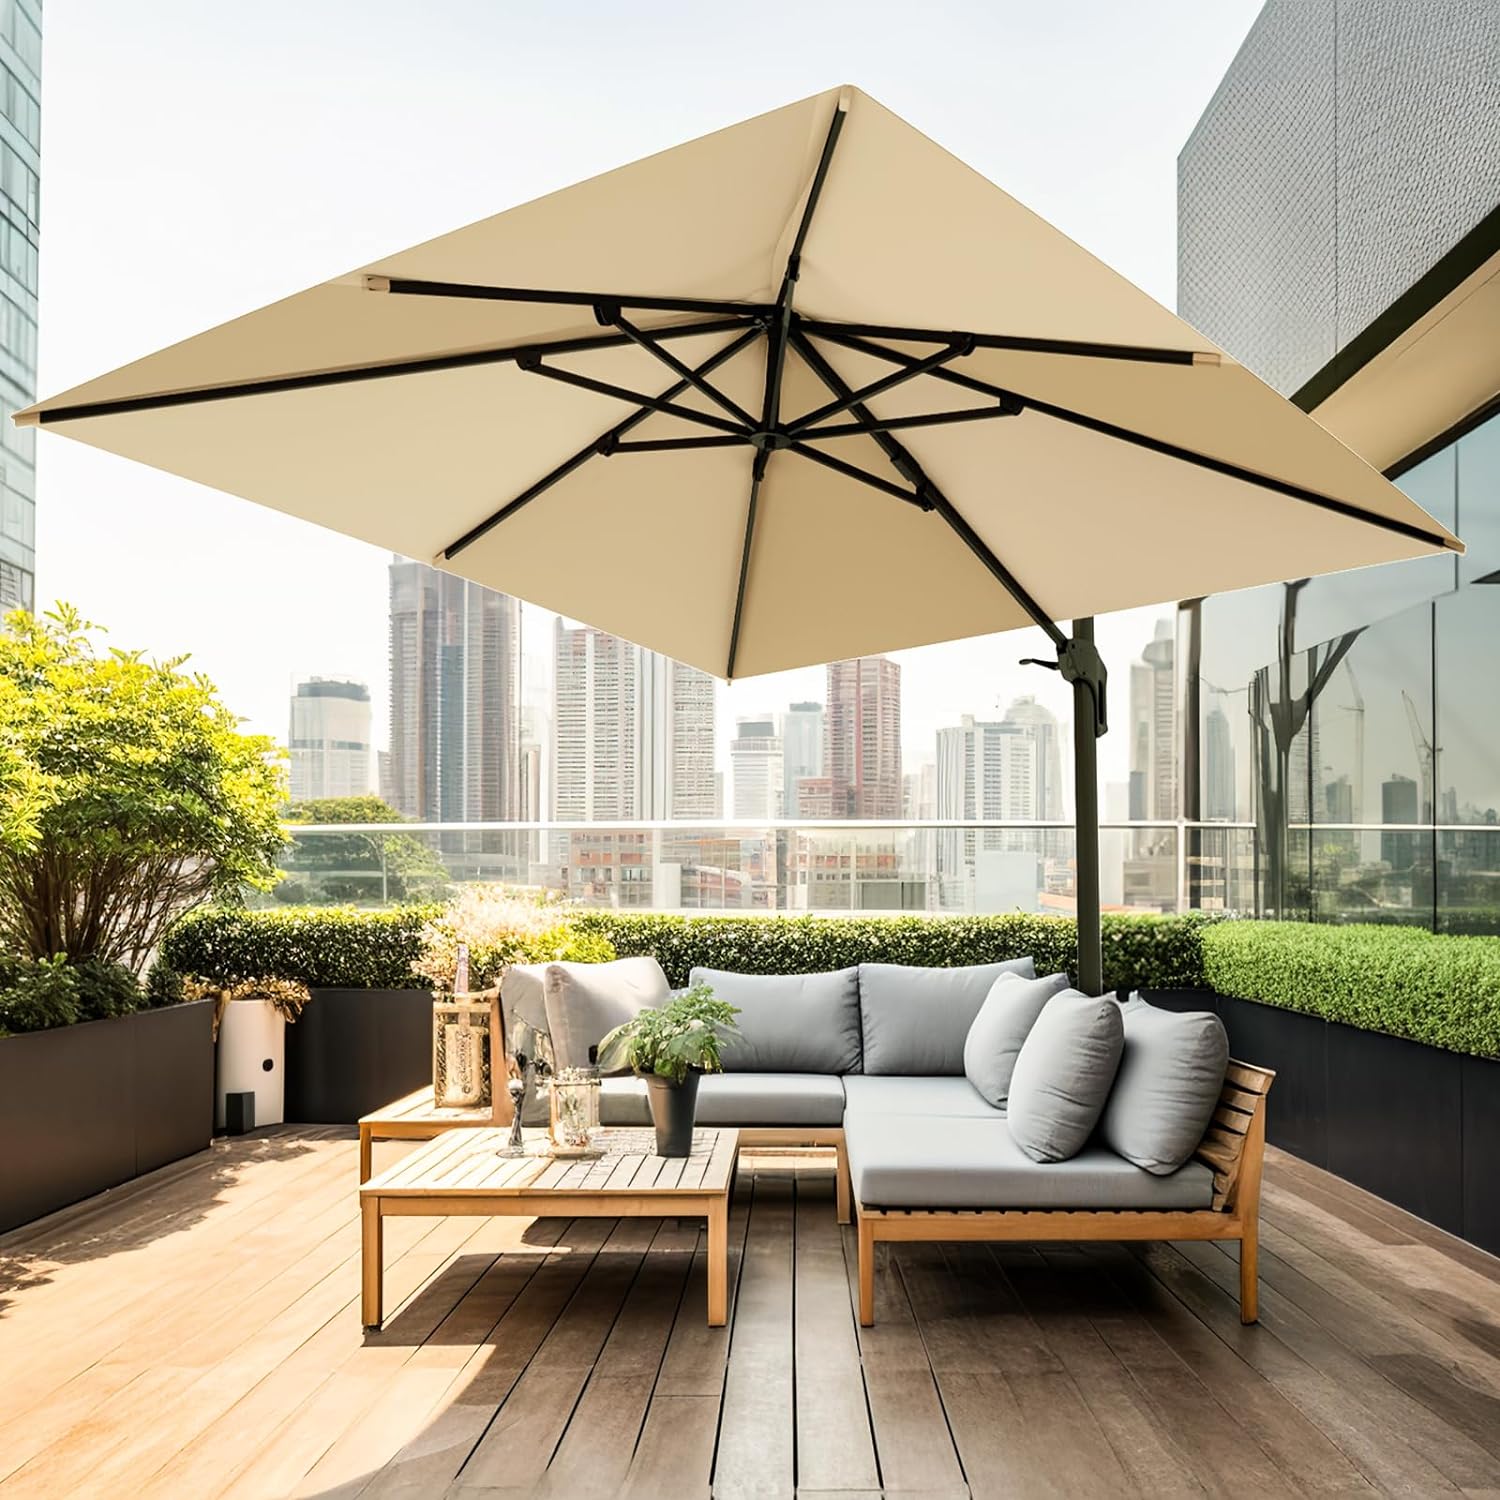 wikiwiki 11x11 FT Cantilever Patio Umbrella Outdoor Offset Square Umbrella w/ 36 Month Fade Resistance Recycled Fabric, 6-Level 360Rotation Aluminum Pole for Deck Pool, Beige